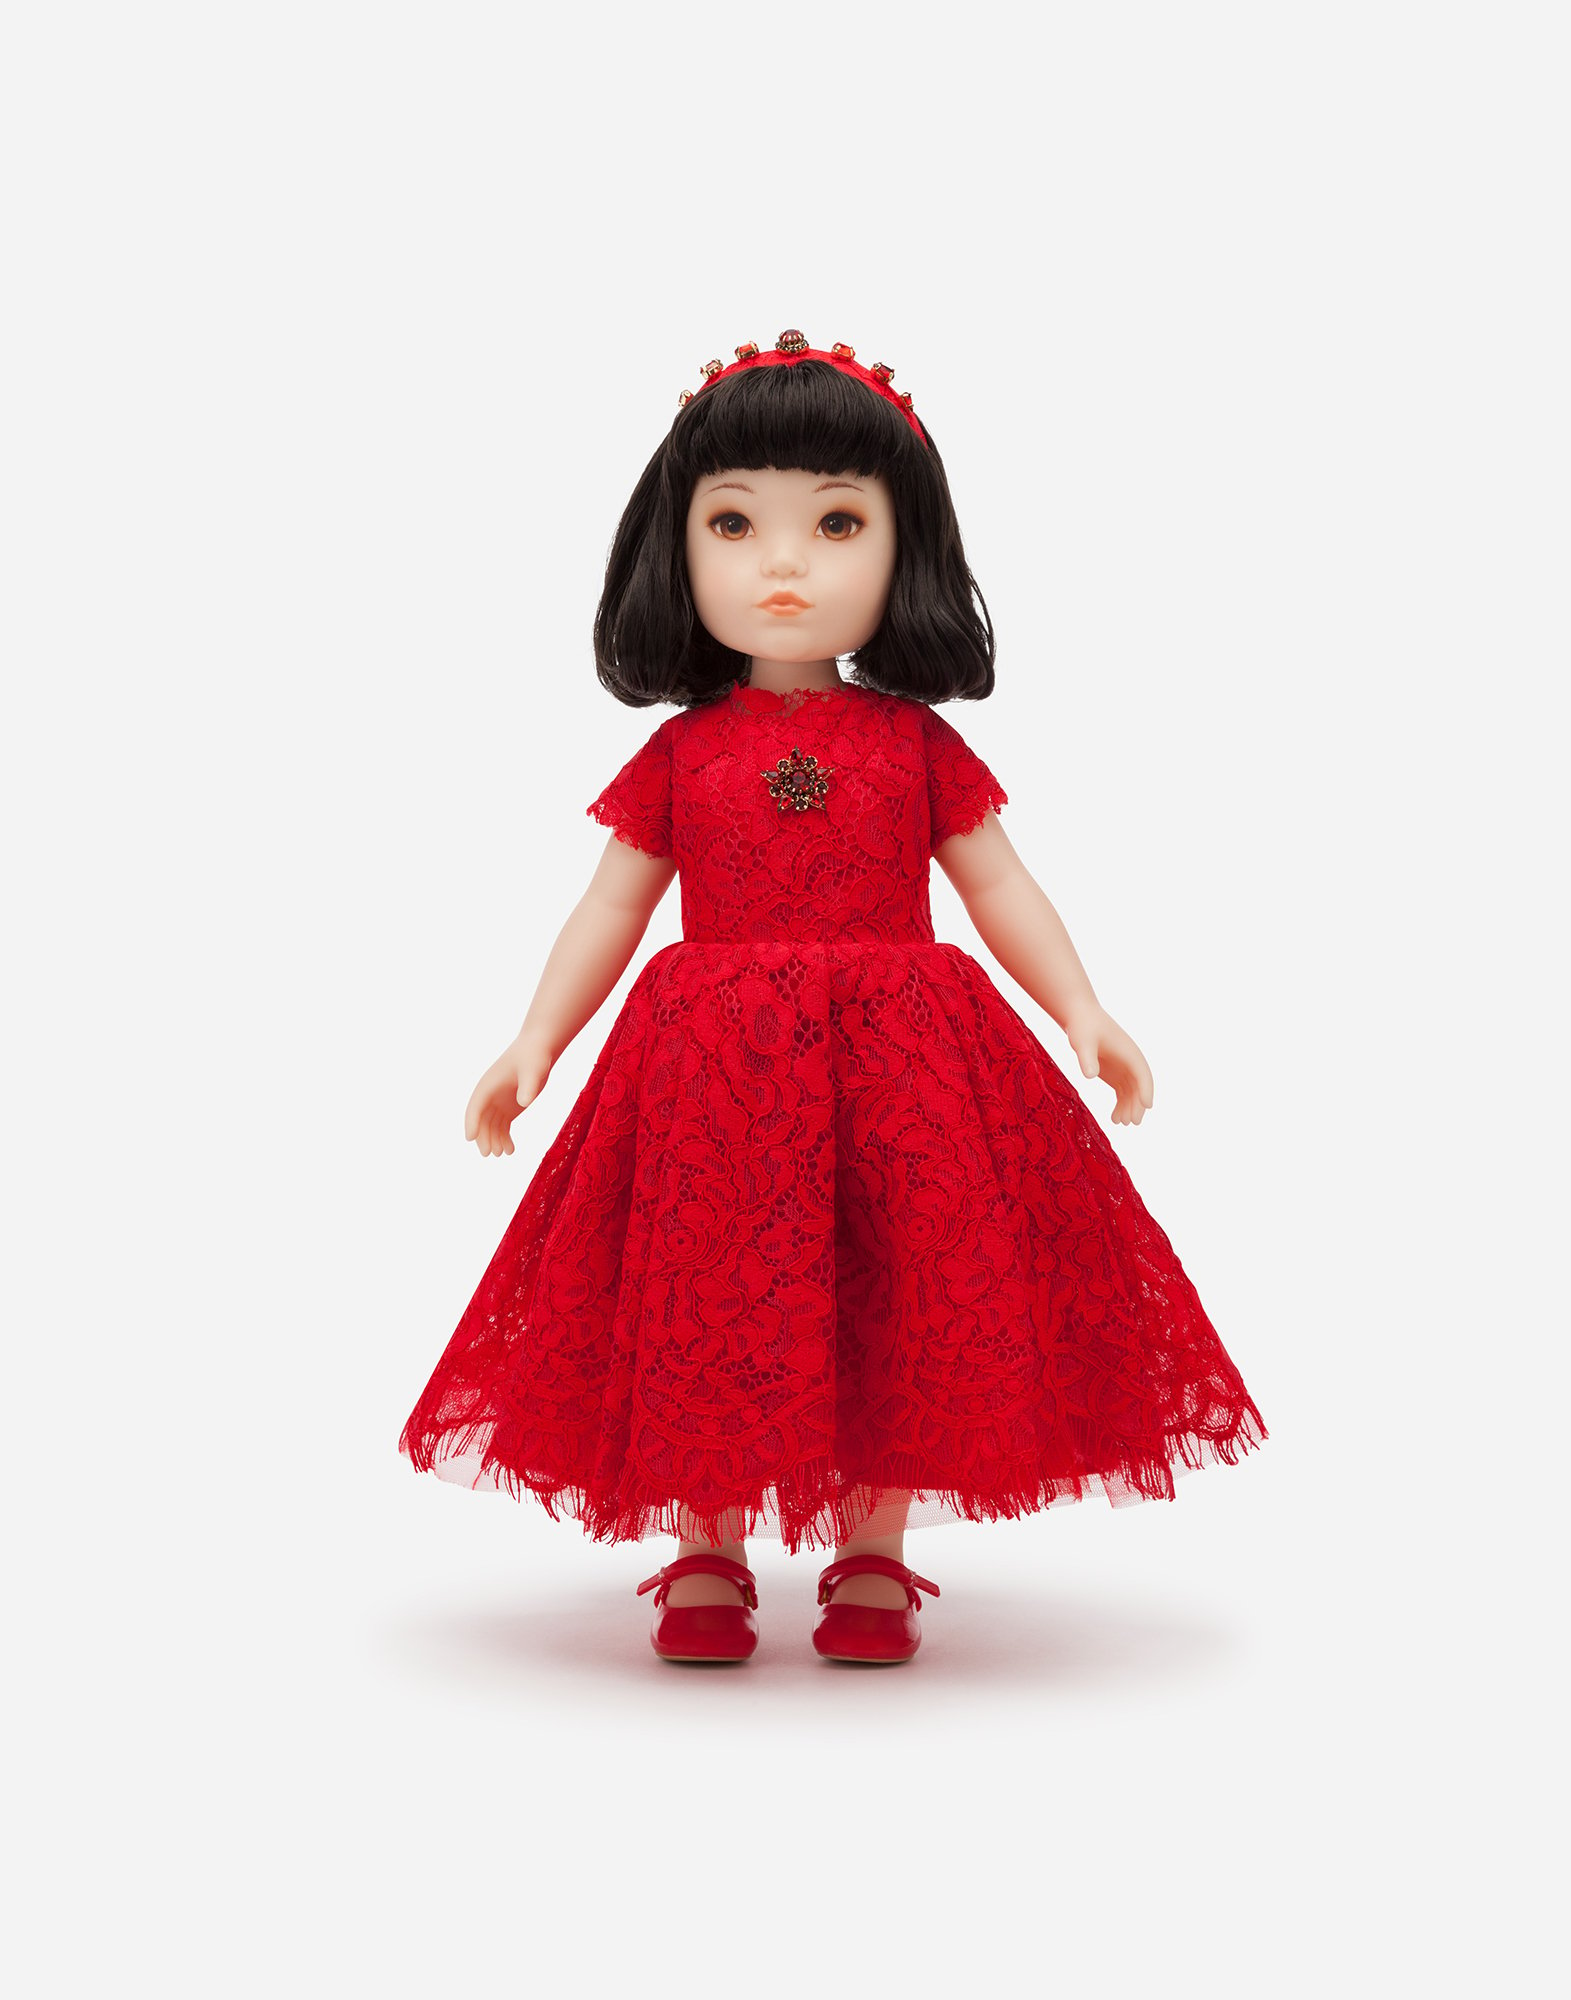 DOLCE & GABBANA DOLL WITH LACE DRESS